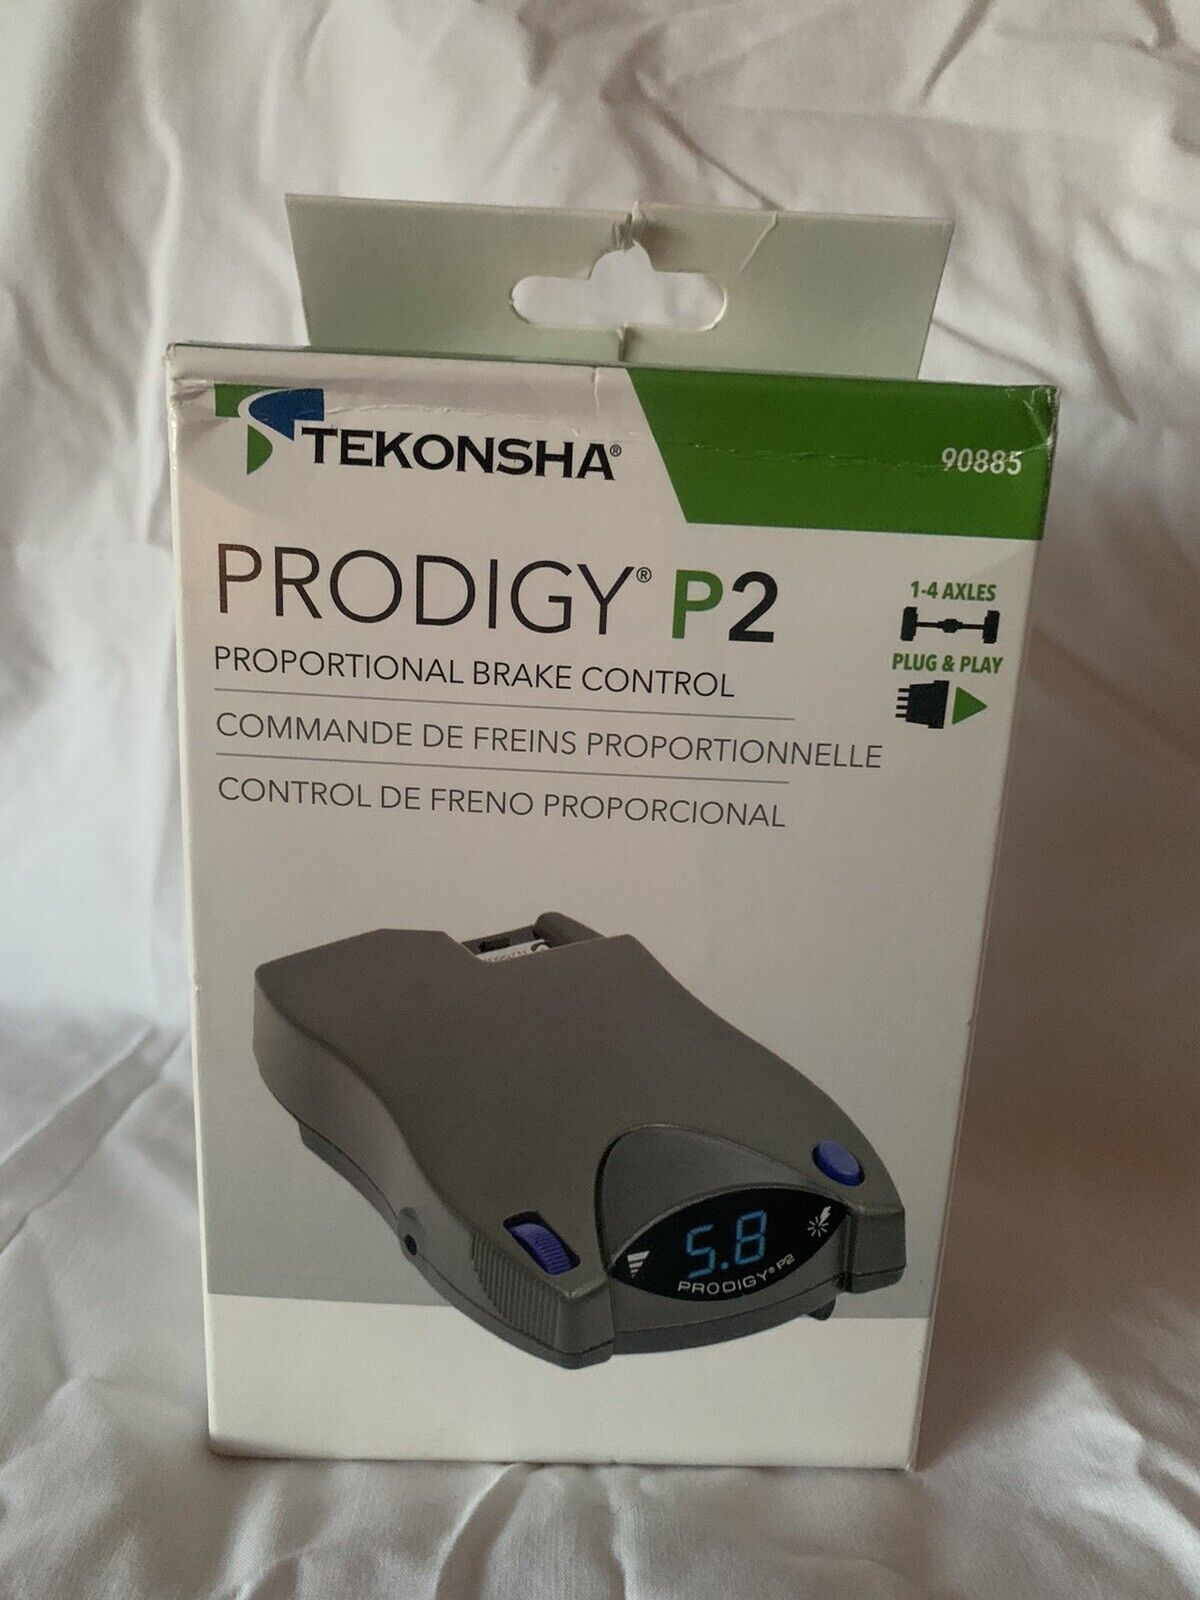 Tekonsha Prodigy  P2 Proportional Brake Controller for Trailers with 1-4 Axles, 